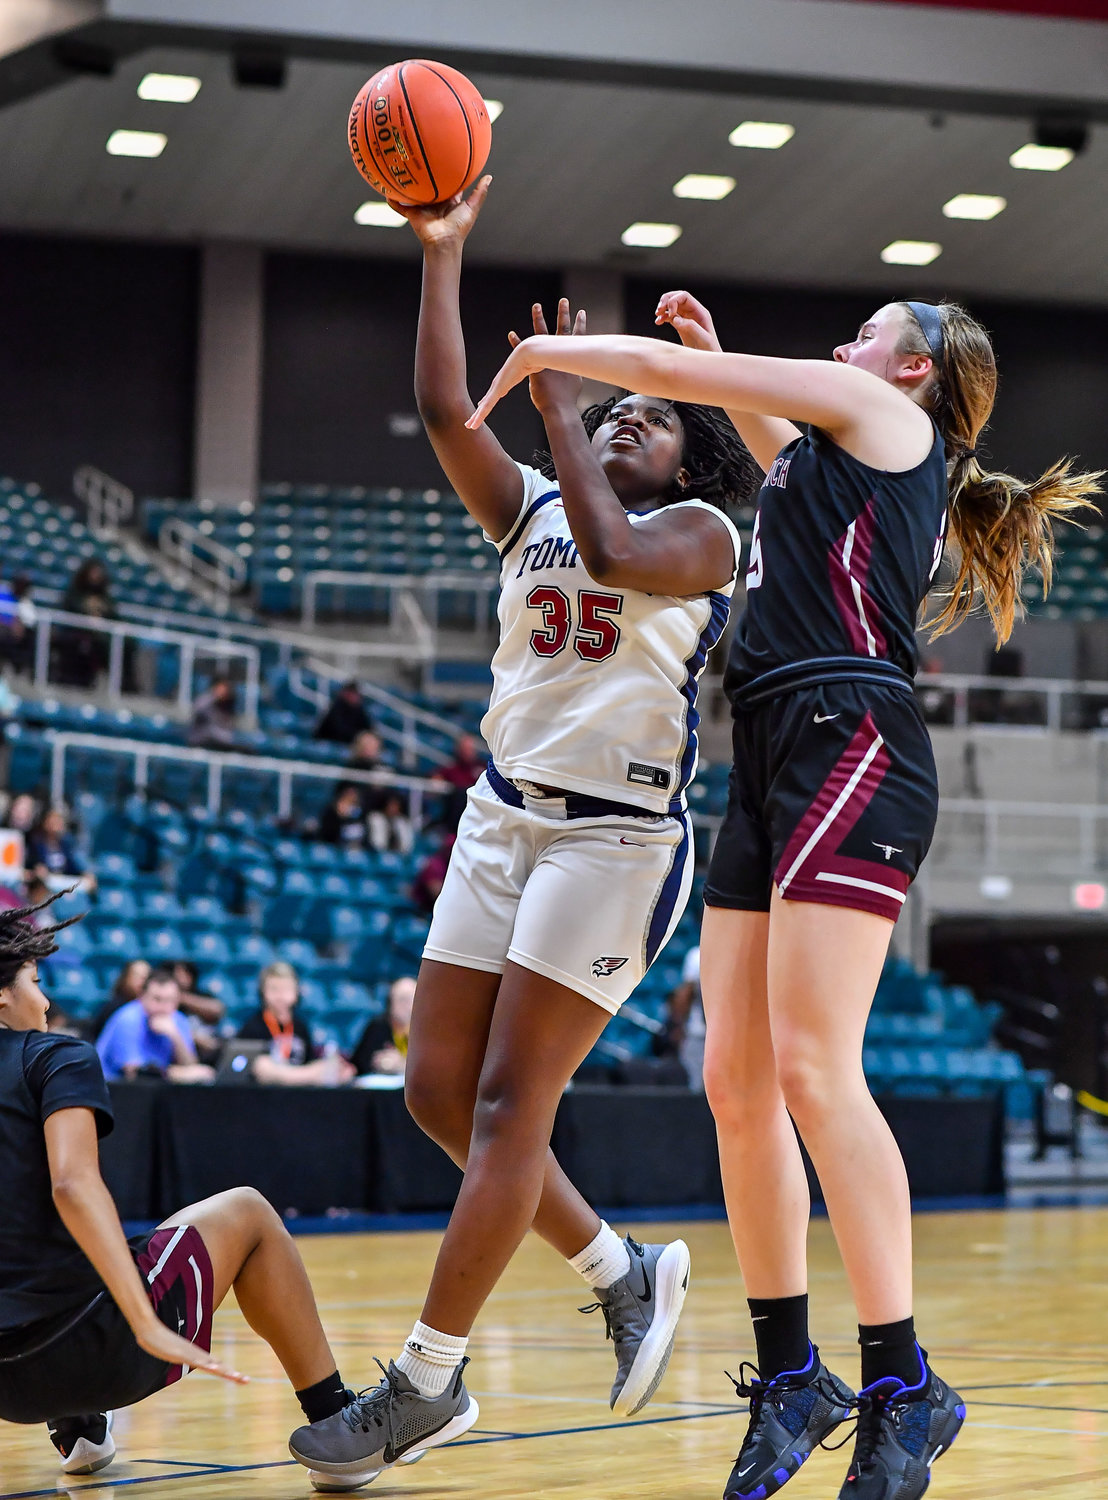 Katy Tx. Feb 15, 2022: Tompkins Fiyin Adeleye #35 goes up for the shot during the Bi-District playoff, Tompkins vs George Ranch. (Photo by Mark Goodman / Katy Times)